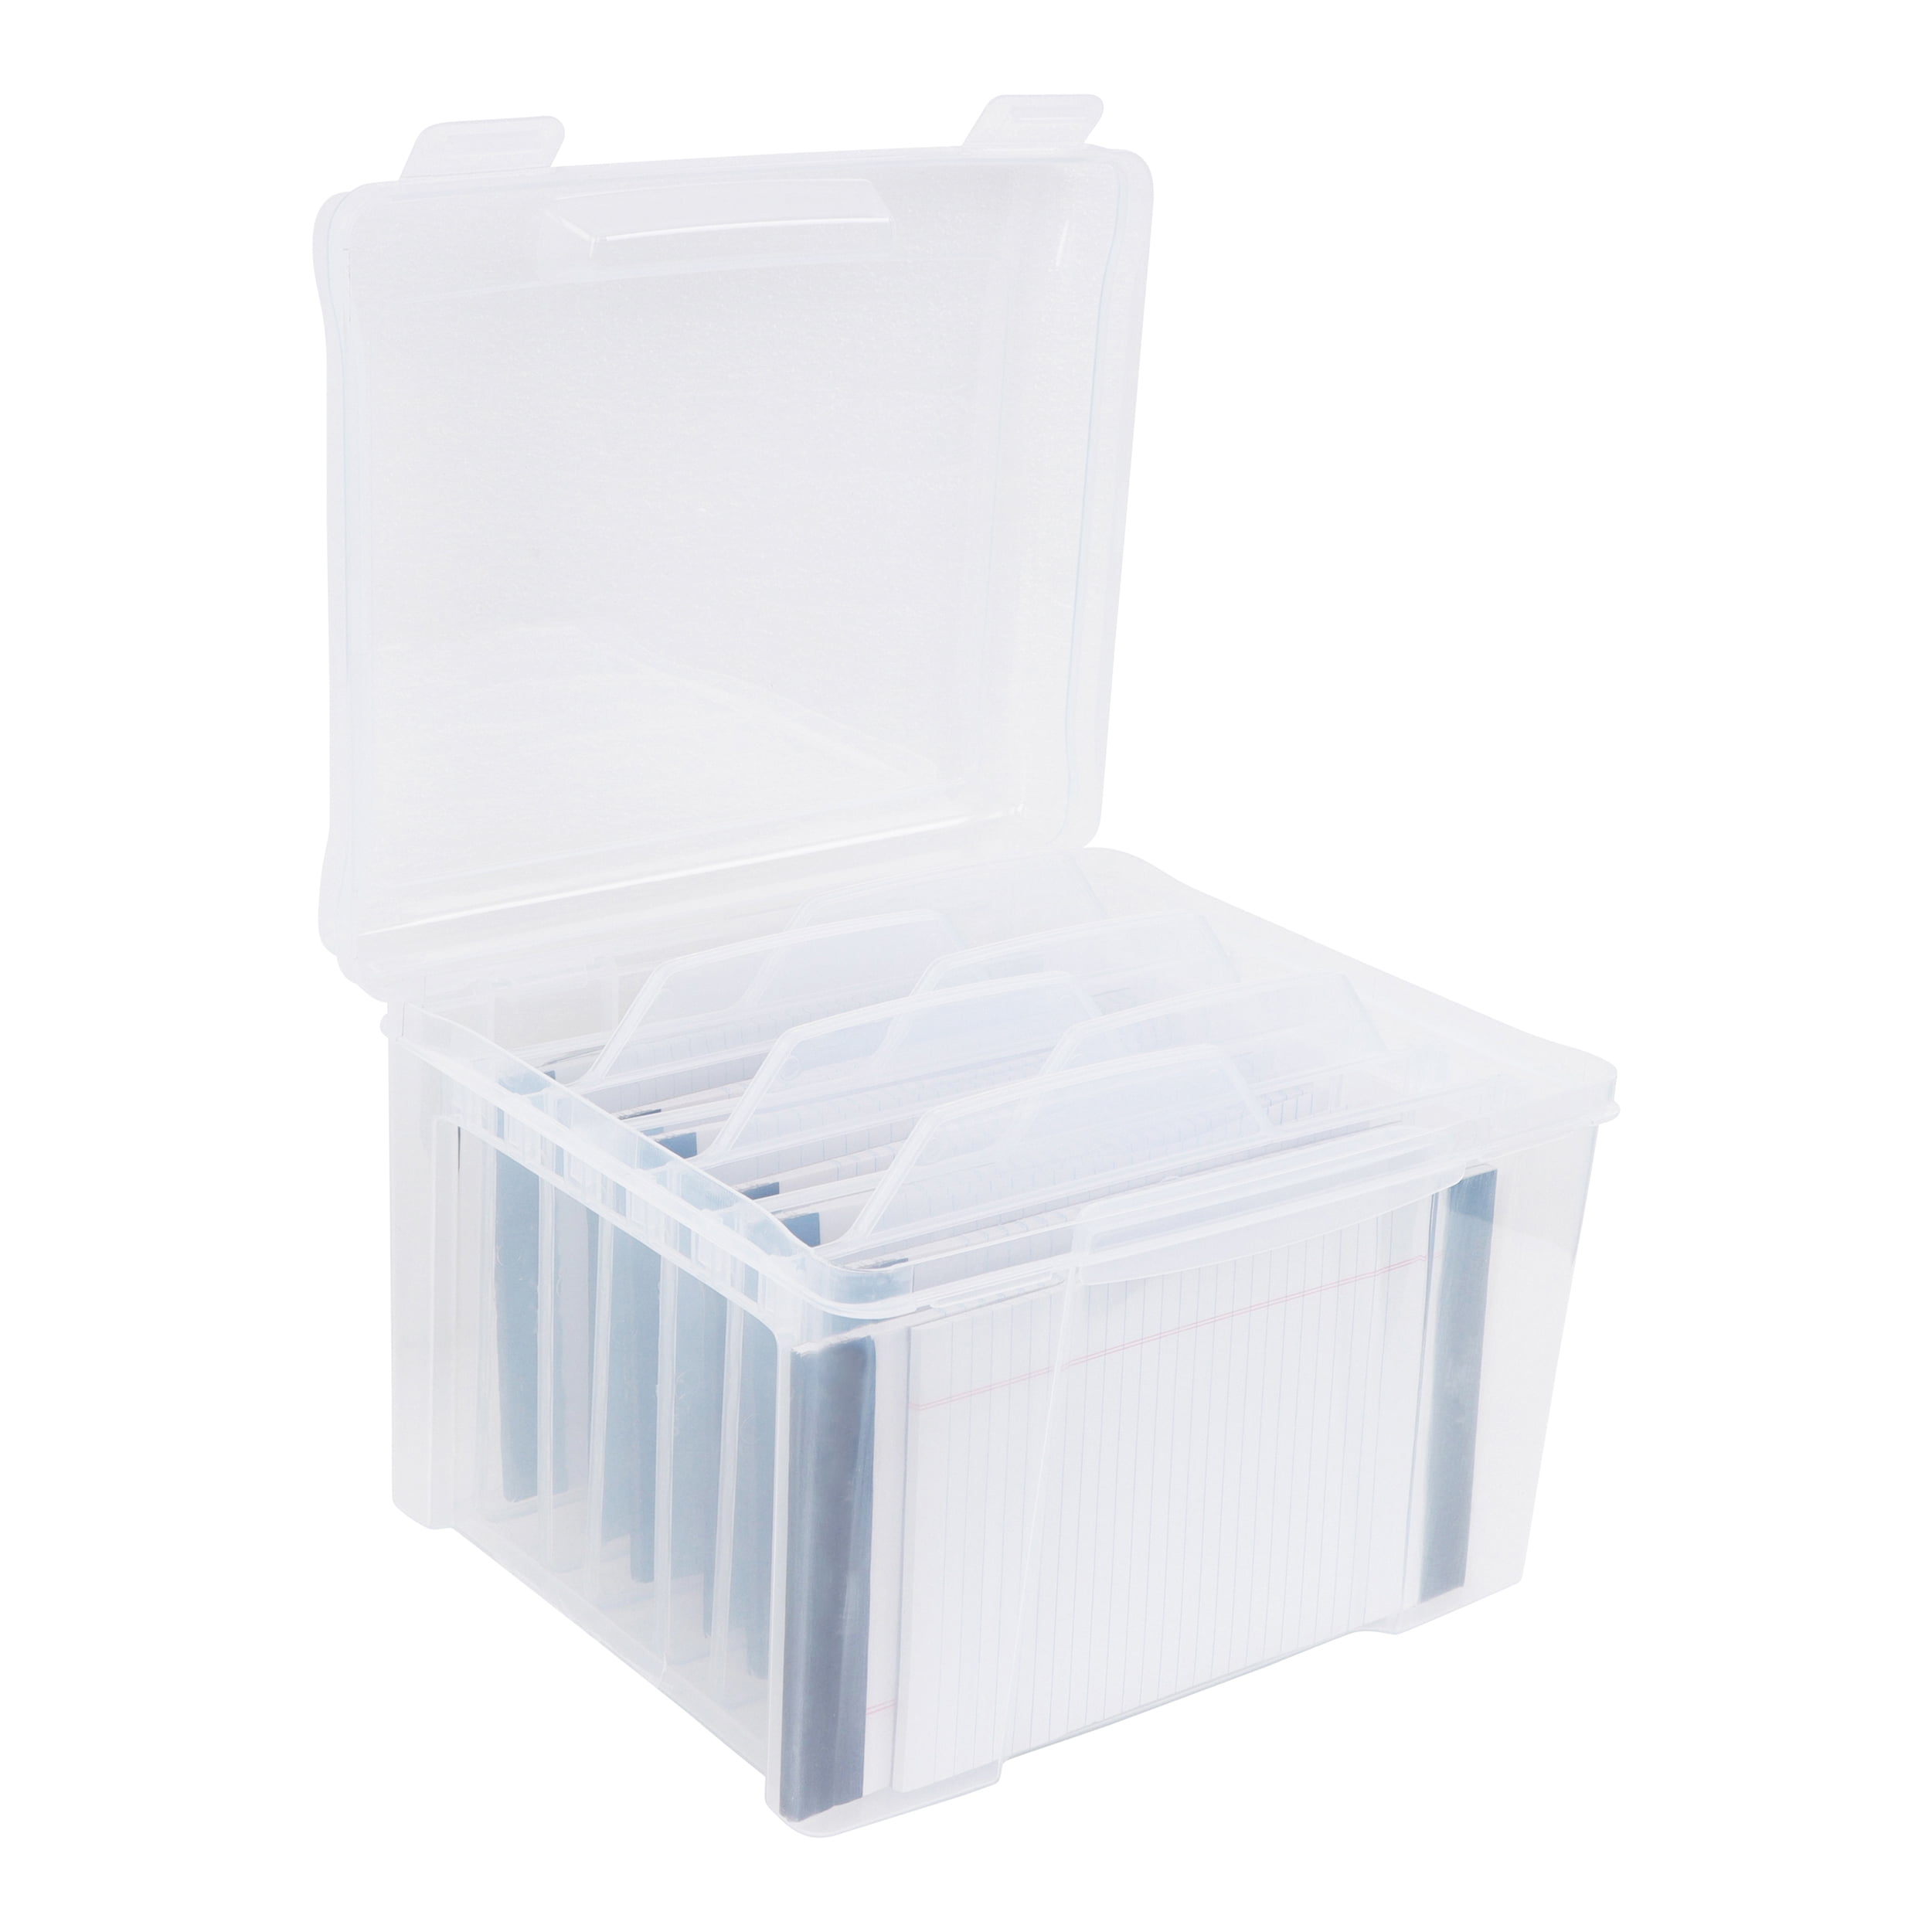 CraftyBook All Occasion Card Storage Box - Assorted Card Box with 6  Dividers